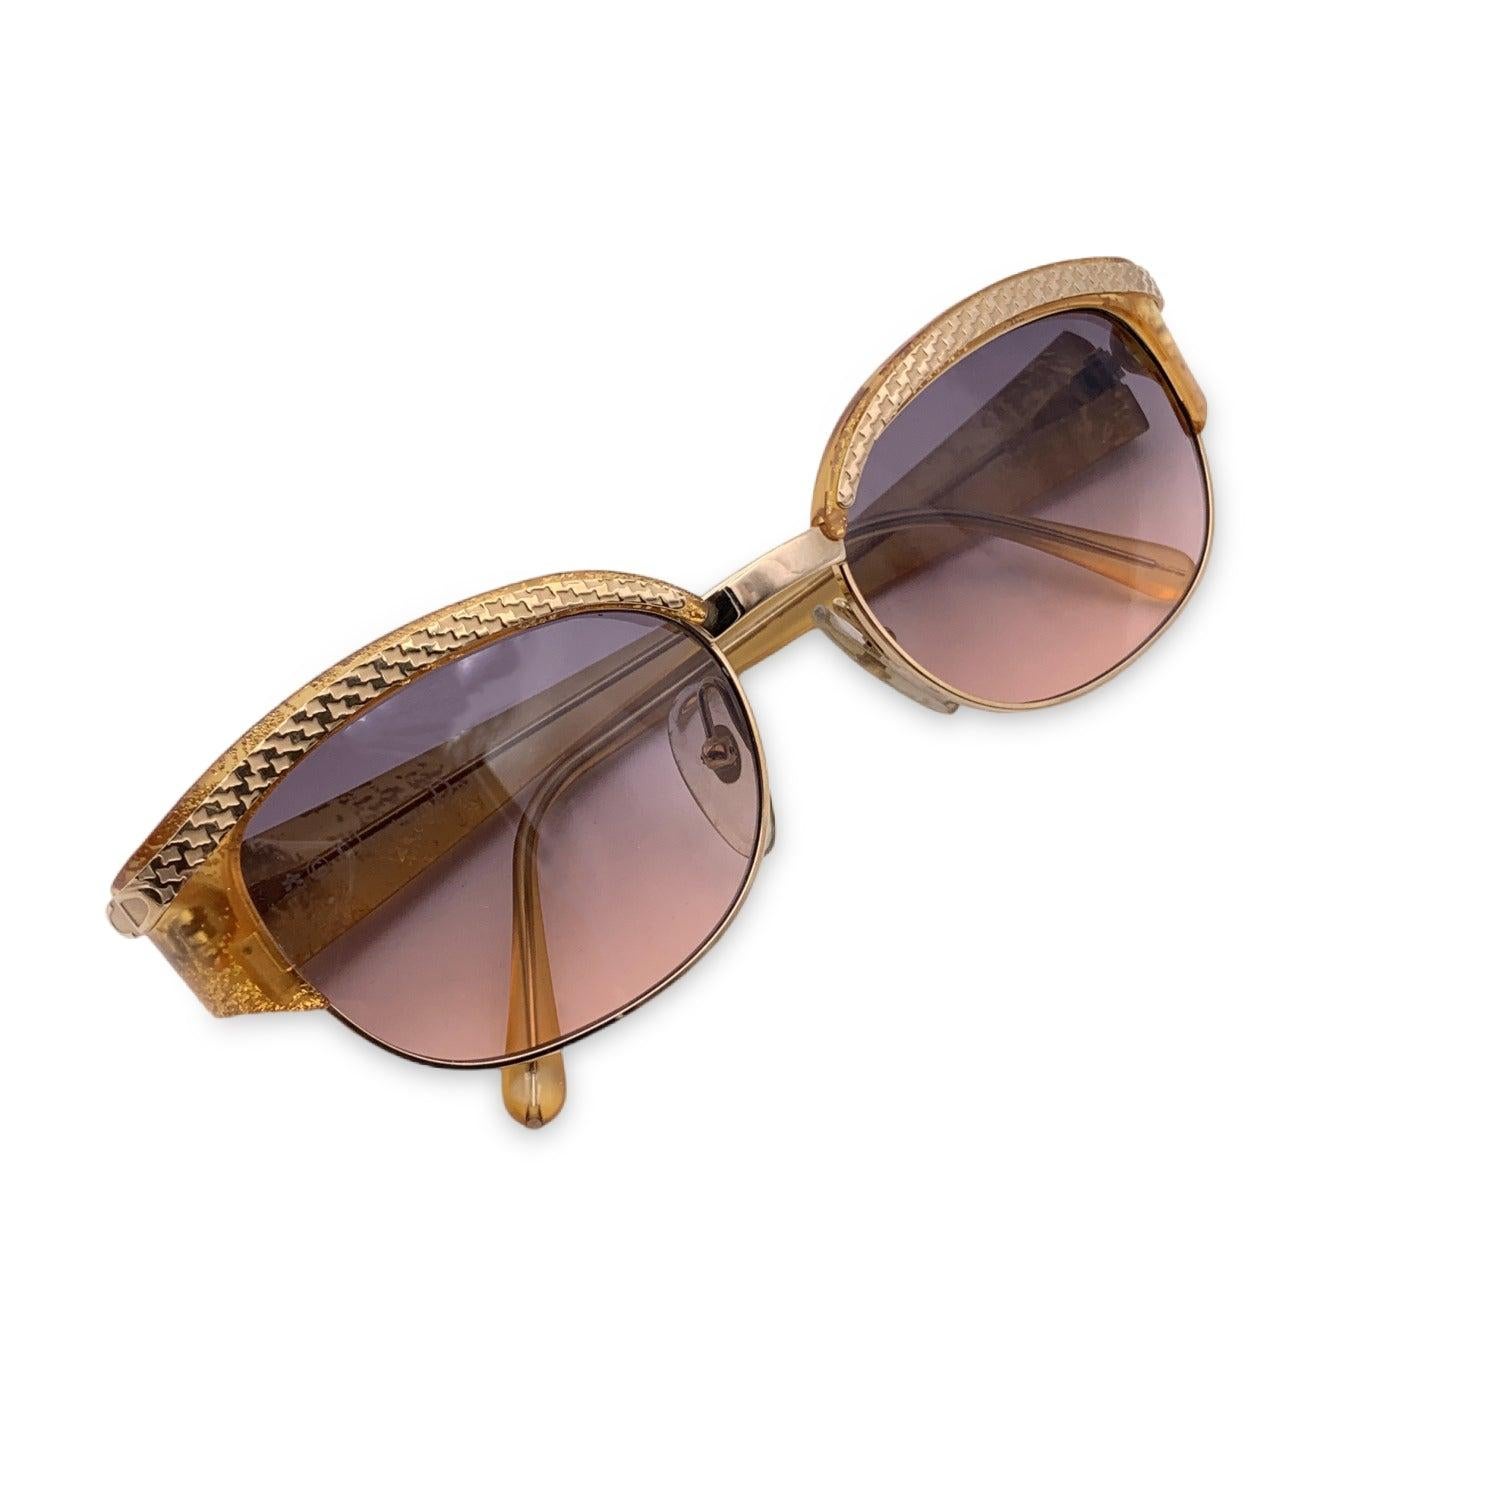 Vintage Christian Dior Women Sunglasses, Mod. 2589 44 Optyl. Size: 55/18 130mm. Orange plastic frame with a gold detail on the upper frame, with CD logo on temples. 100% Total UVA/UVB protection. Brown gradient lenses. Details MATERIAL: Plastic